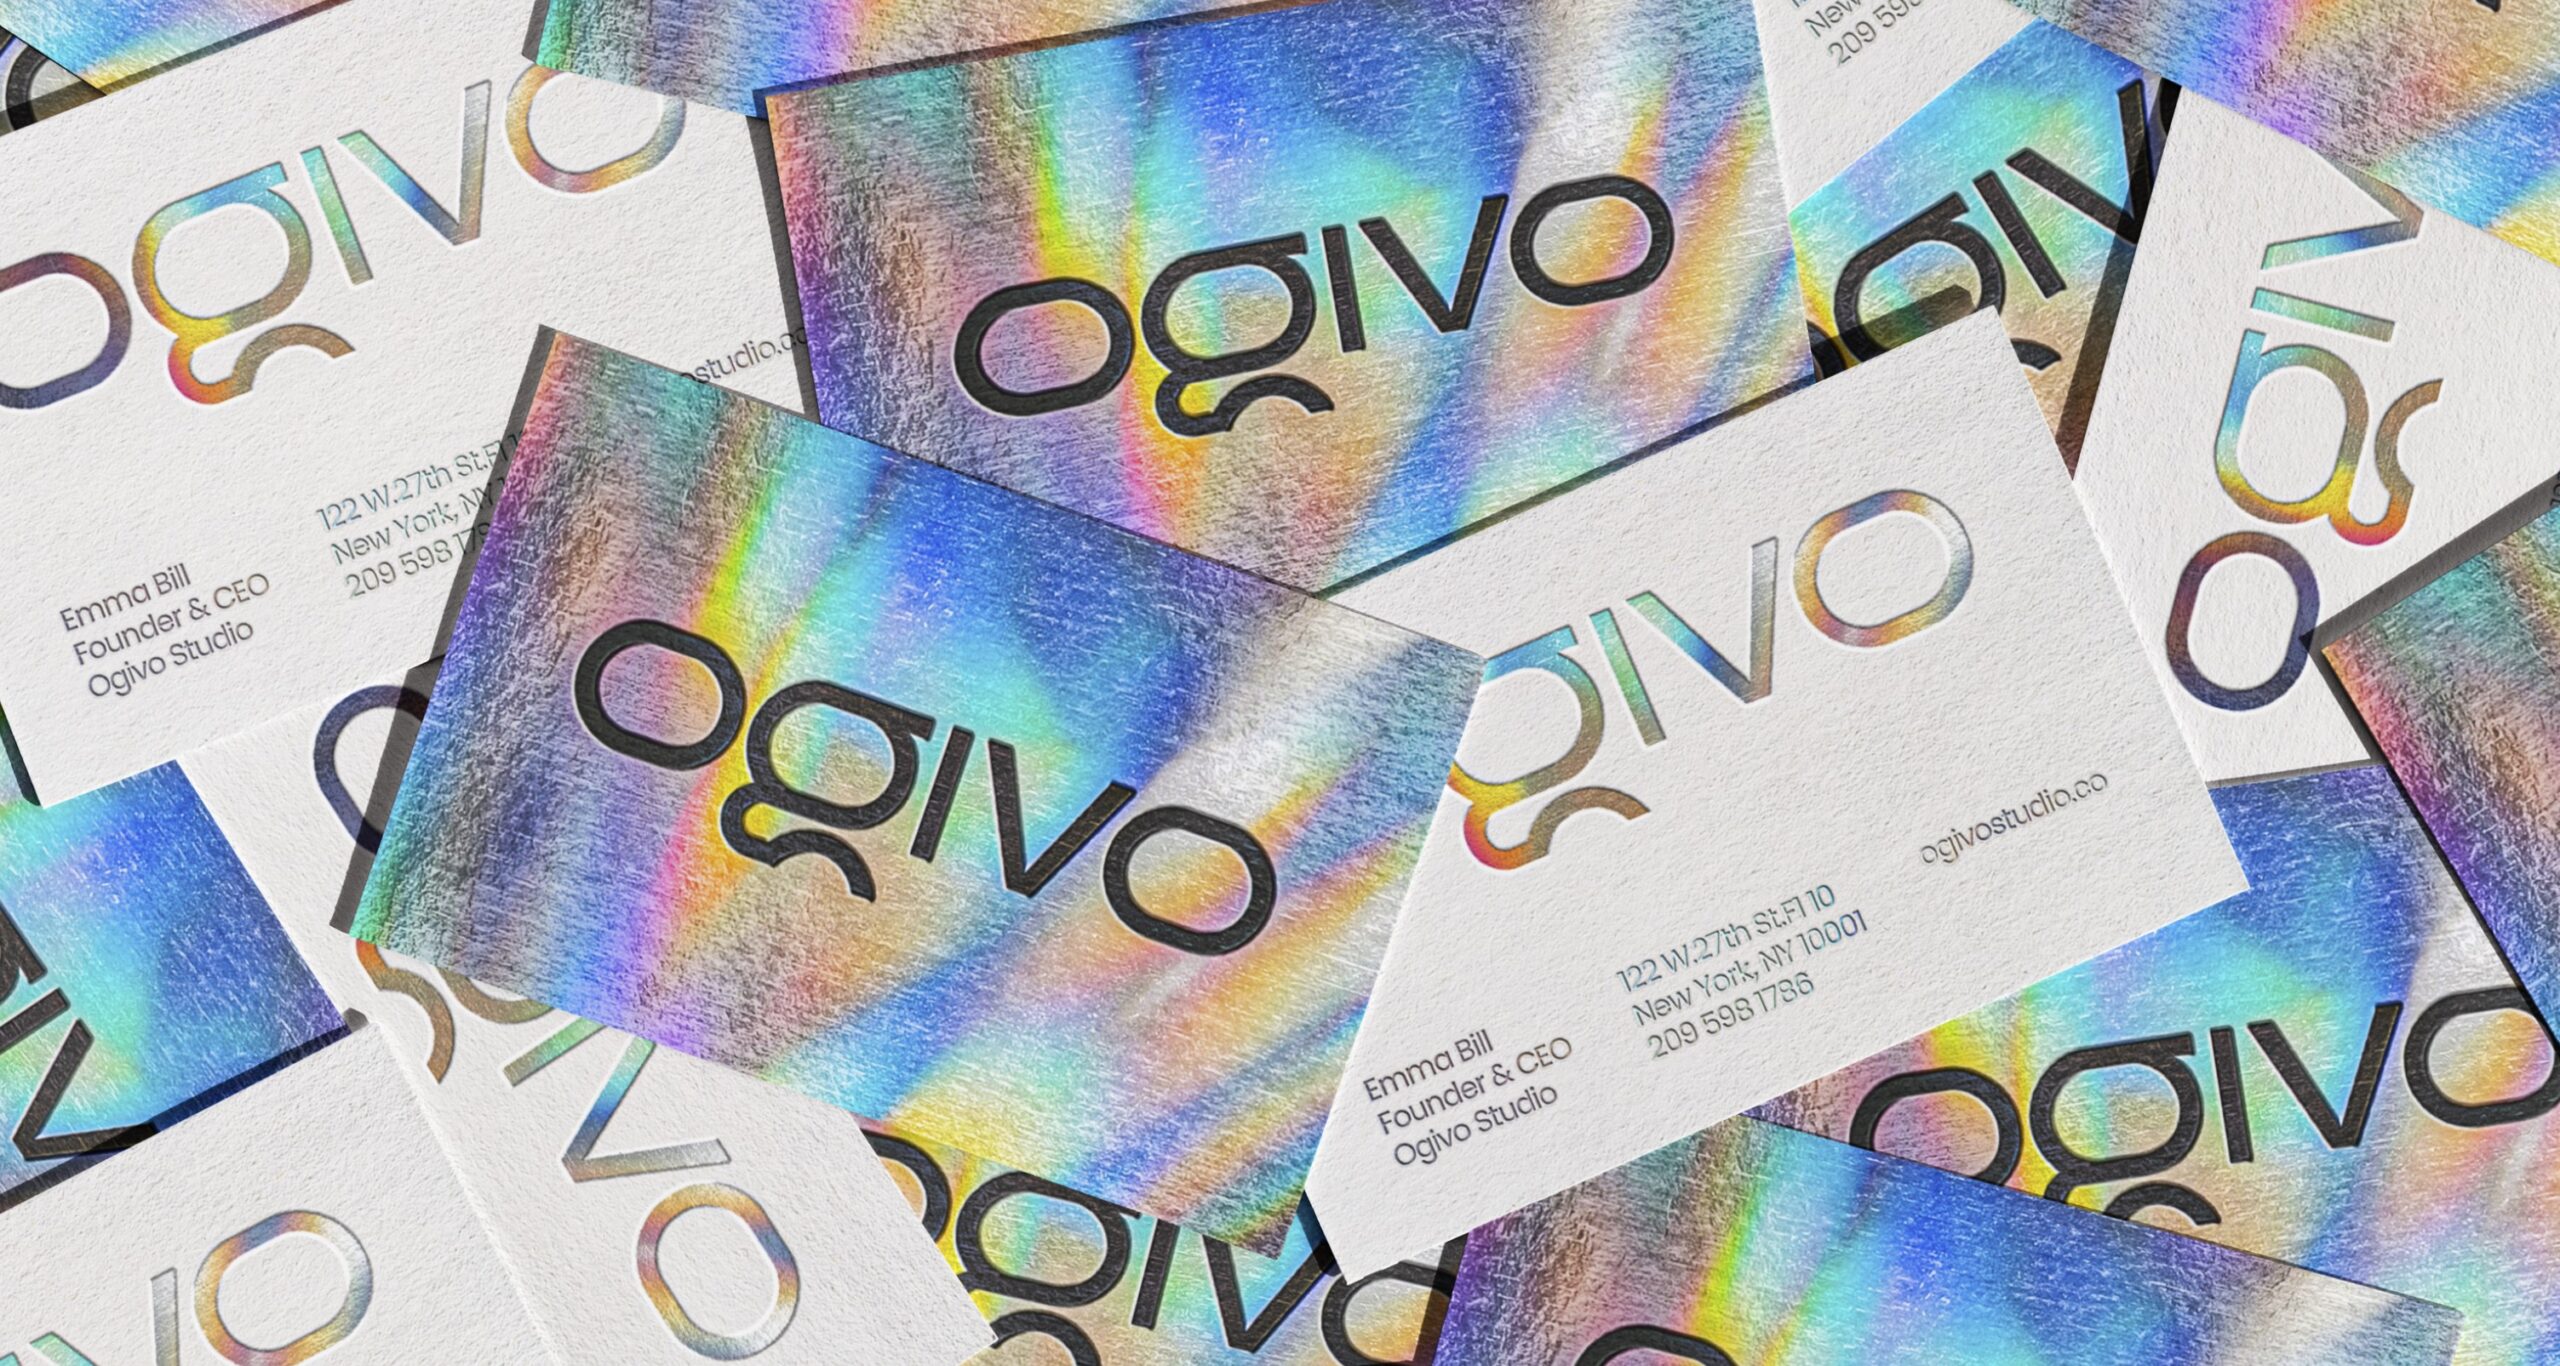 Beautiful Business Cards with Holographic Effects for Inspiration 1 1 scaled